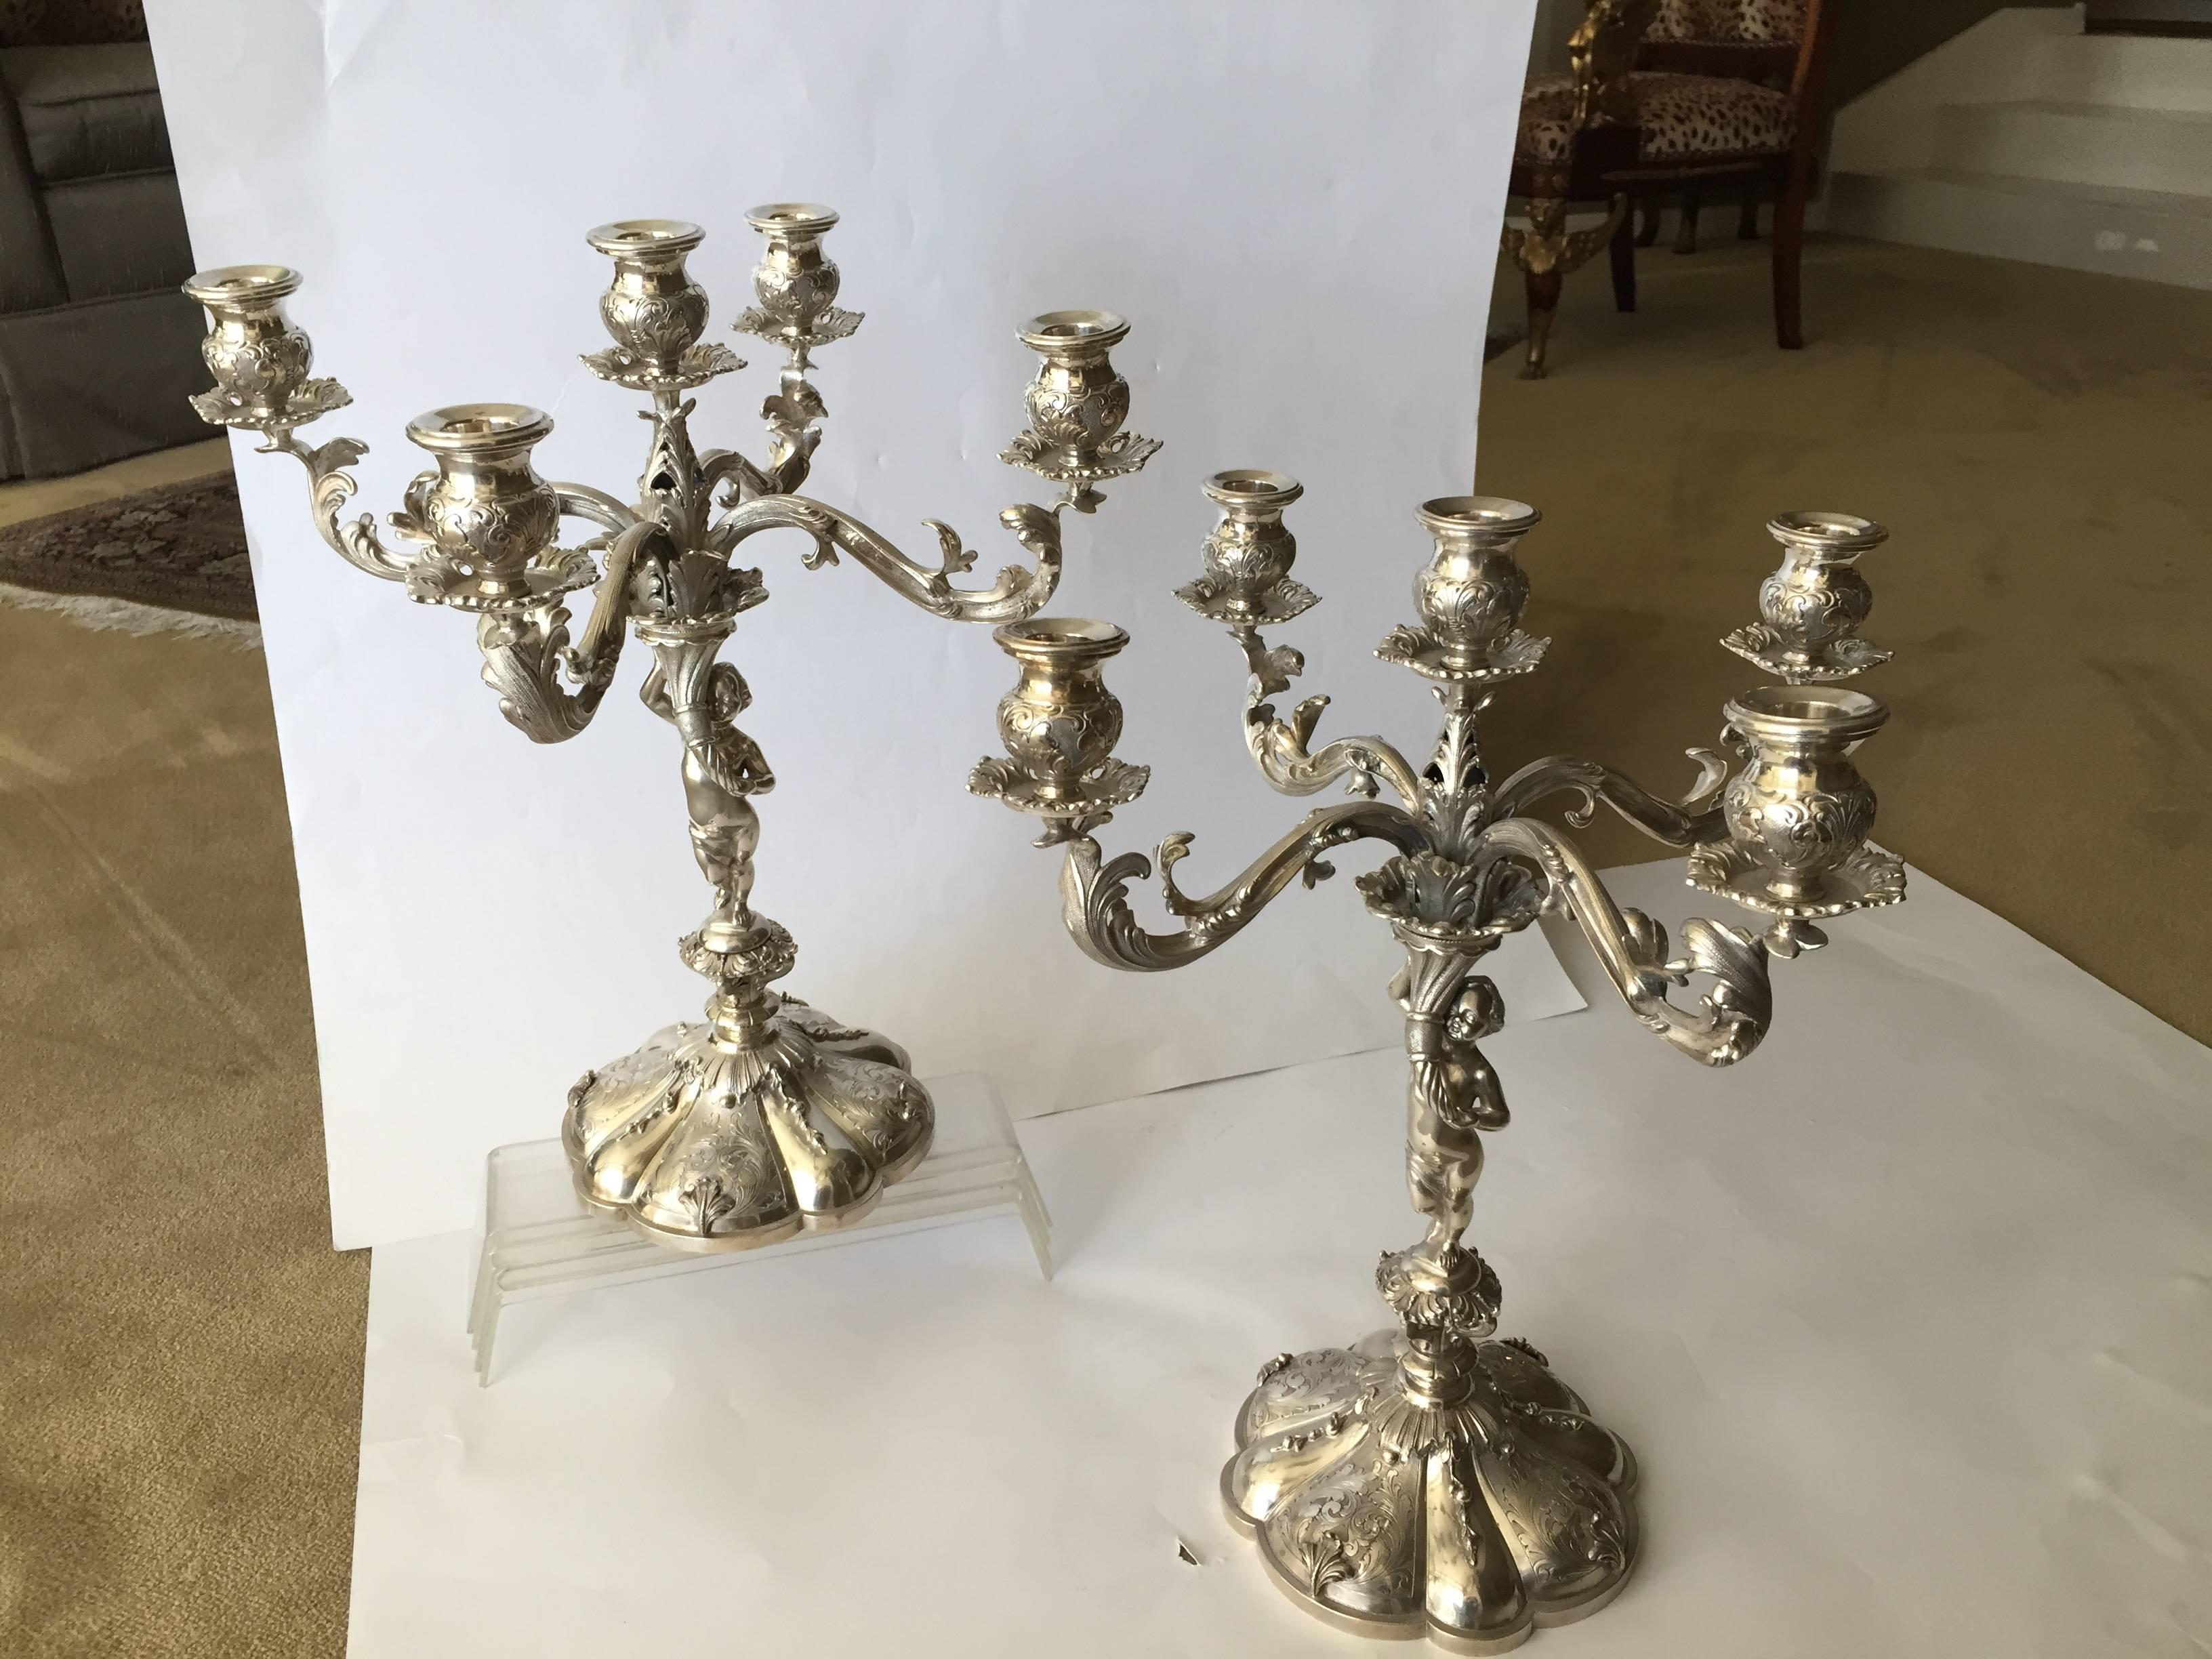 A fabulous pair of candelabra finely cast and chased, a beautiful design with
the branches with a nice wide spread, the subject charming. Signed Bilini,
circa 1940s, Italy.